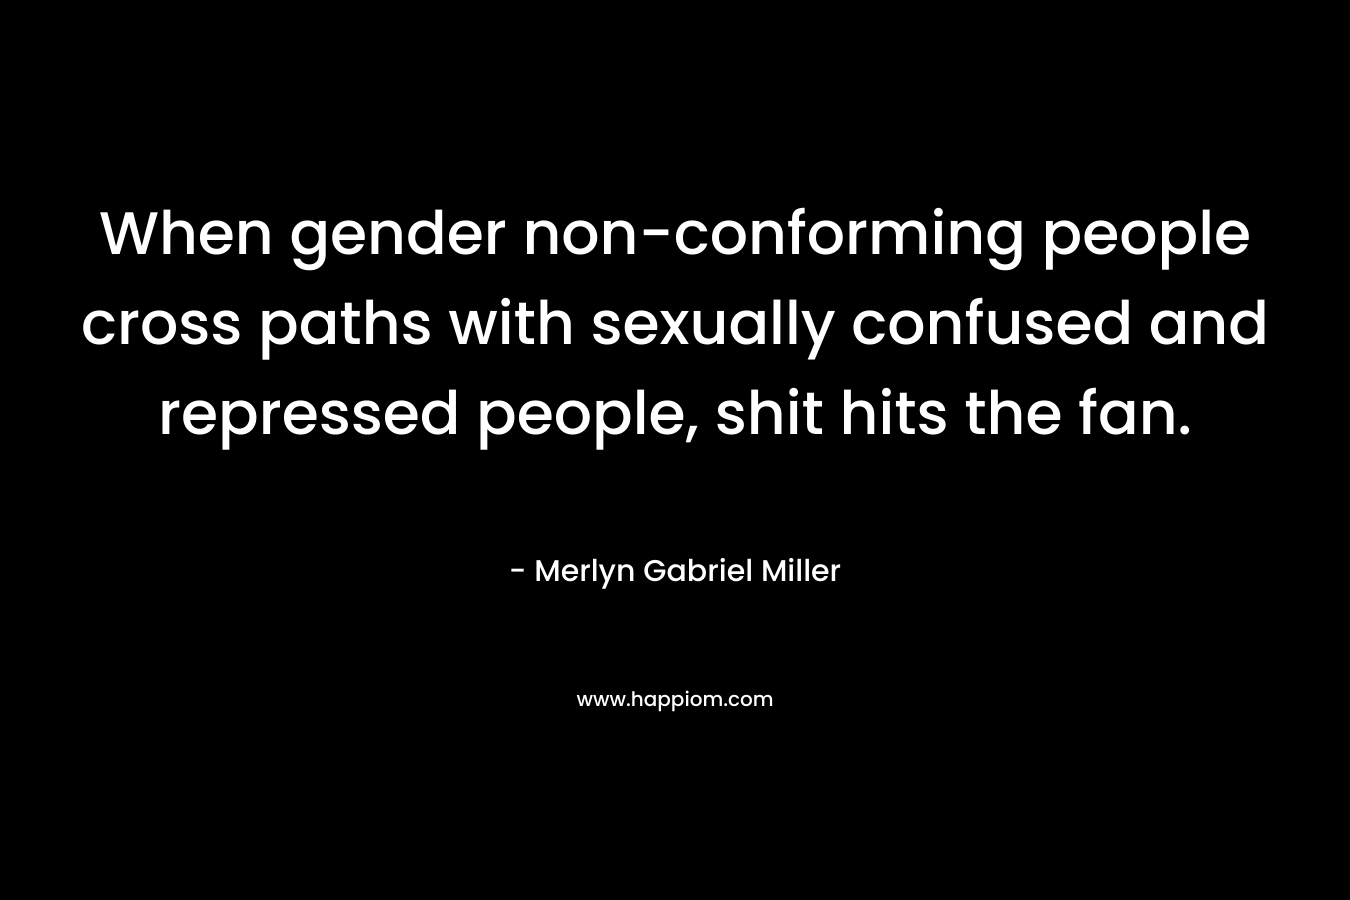 When gender non-conforming people cross paths with sexually confused and repressed people, shit hits the fan. – Merlyn Gabriel Miller